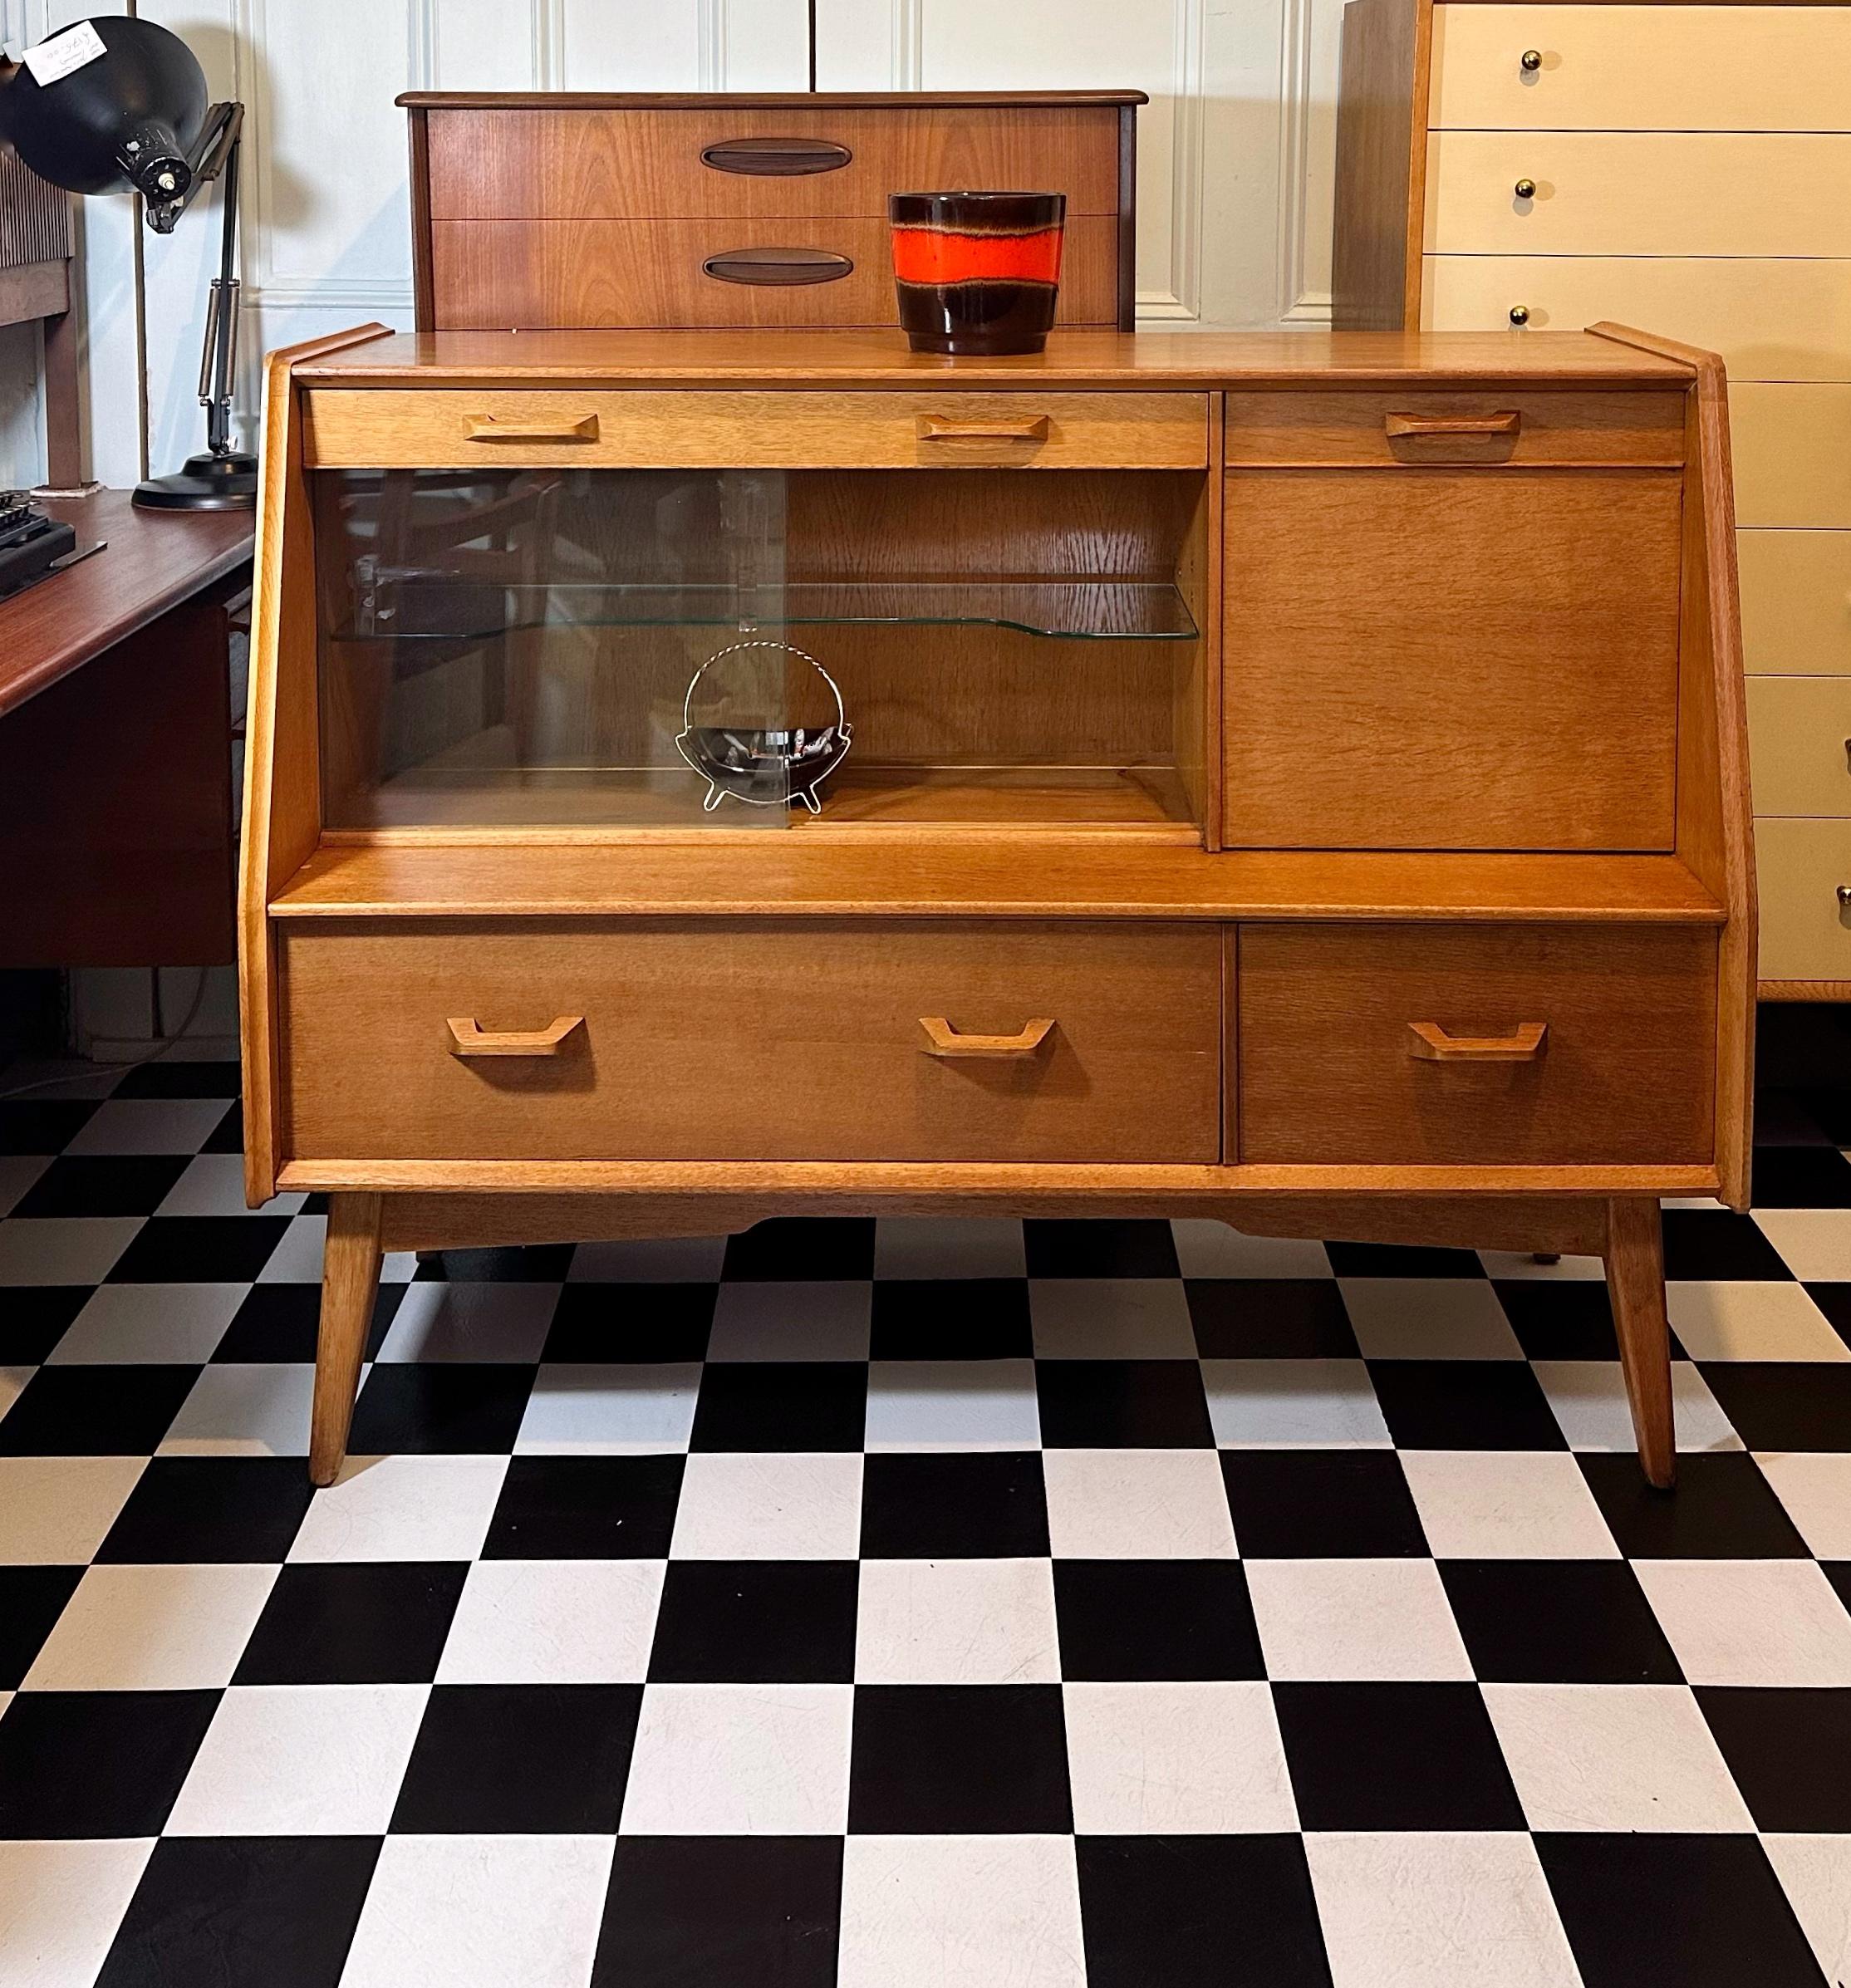 We’re happy to provide our own competitive shipping quotes with trusted couriers. Please message us with your postcode for a more accurate price. Thank you.

Beautiful vintage 1950's oak highboard by E Gomme G Plan. Features one compartment in the